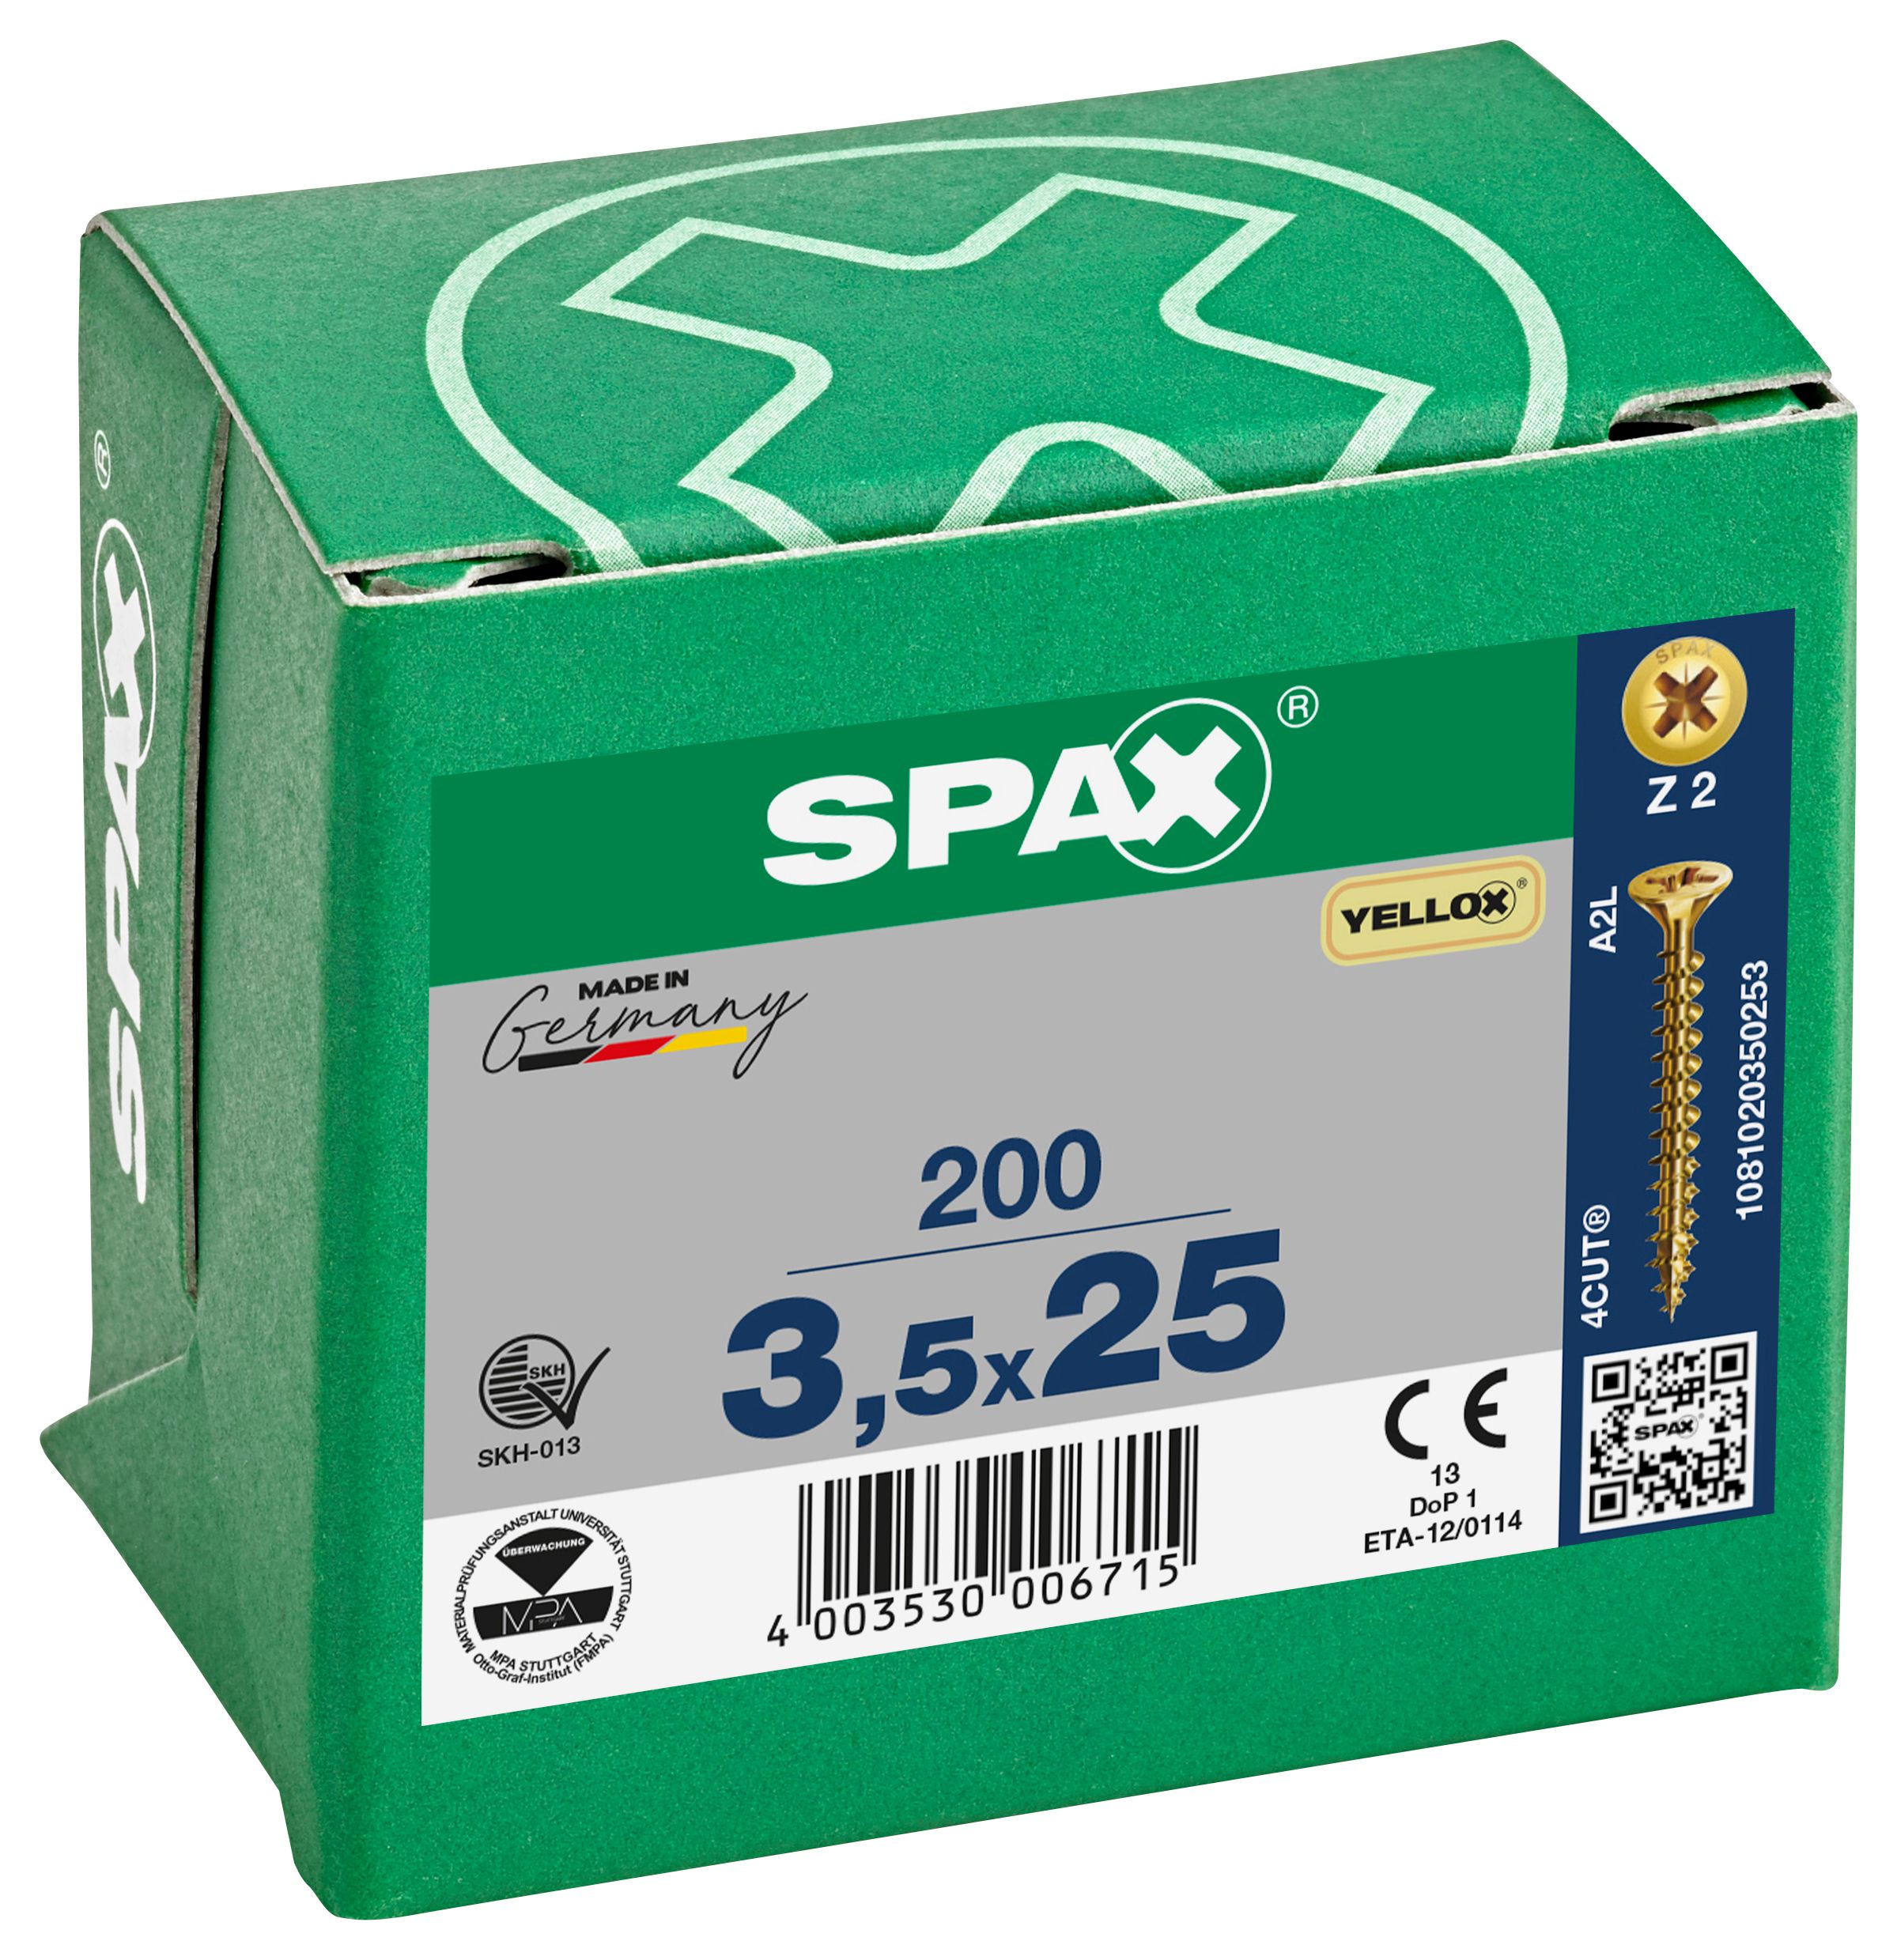 Image of Spax Pz Countersunk Yellox Screws - 3.5x25mm Pack Of 200